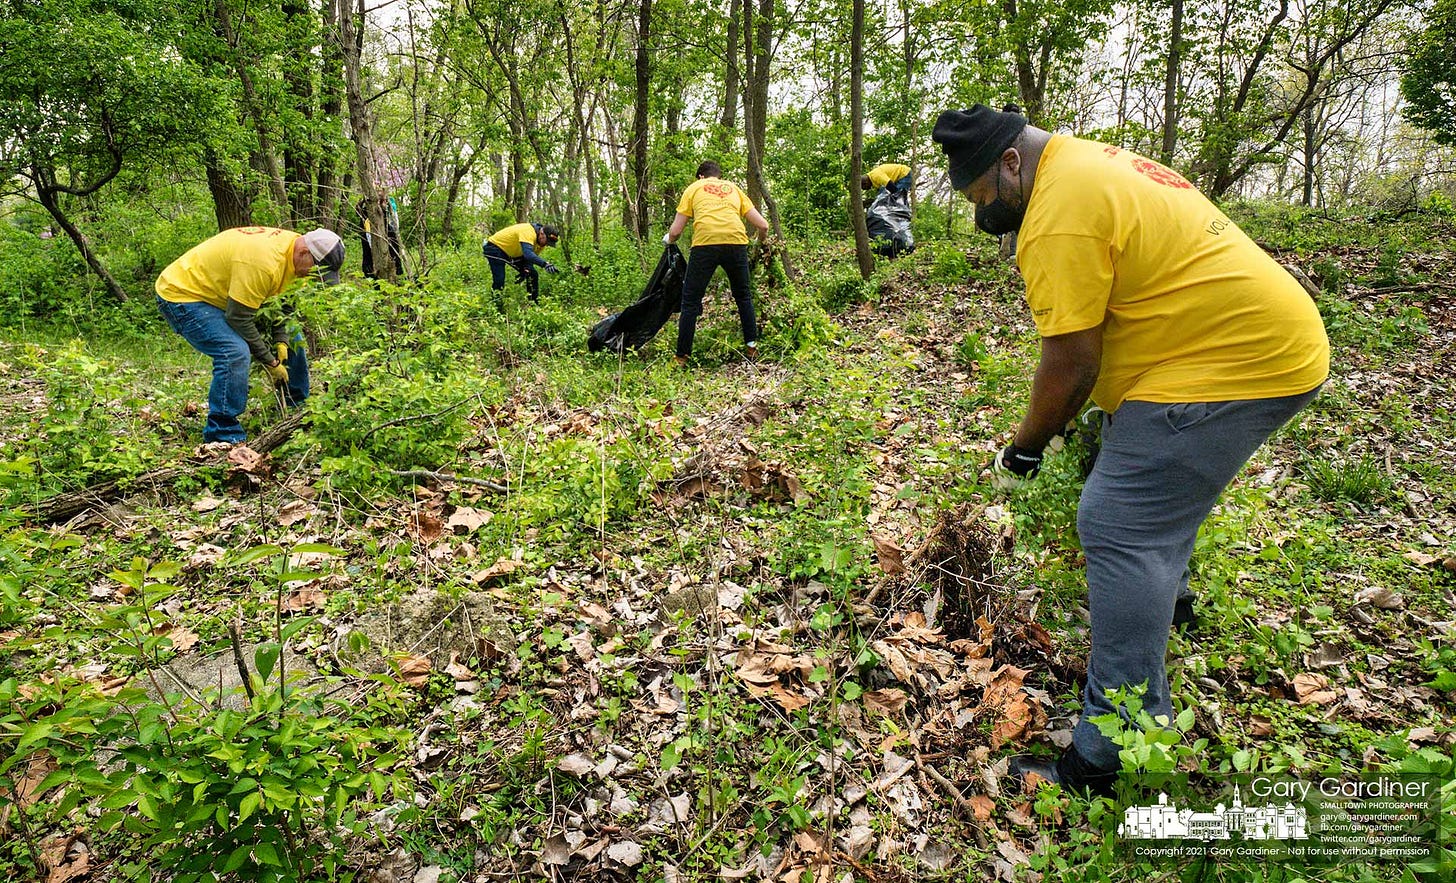 Volunteers from DHL remove invasive species honeysuckle and garlic mustard plants from a wooded section of Heritage Park. My Final Photo for April 23, 2021.